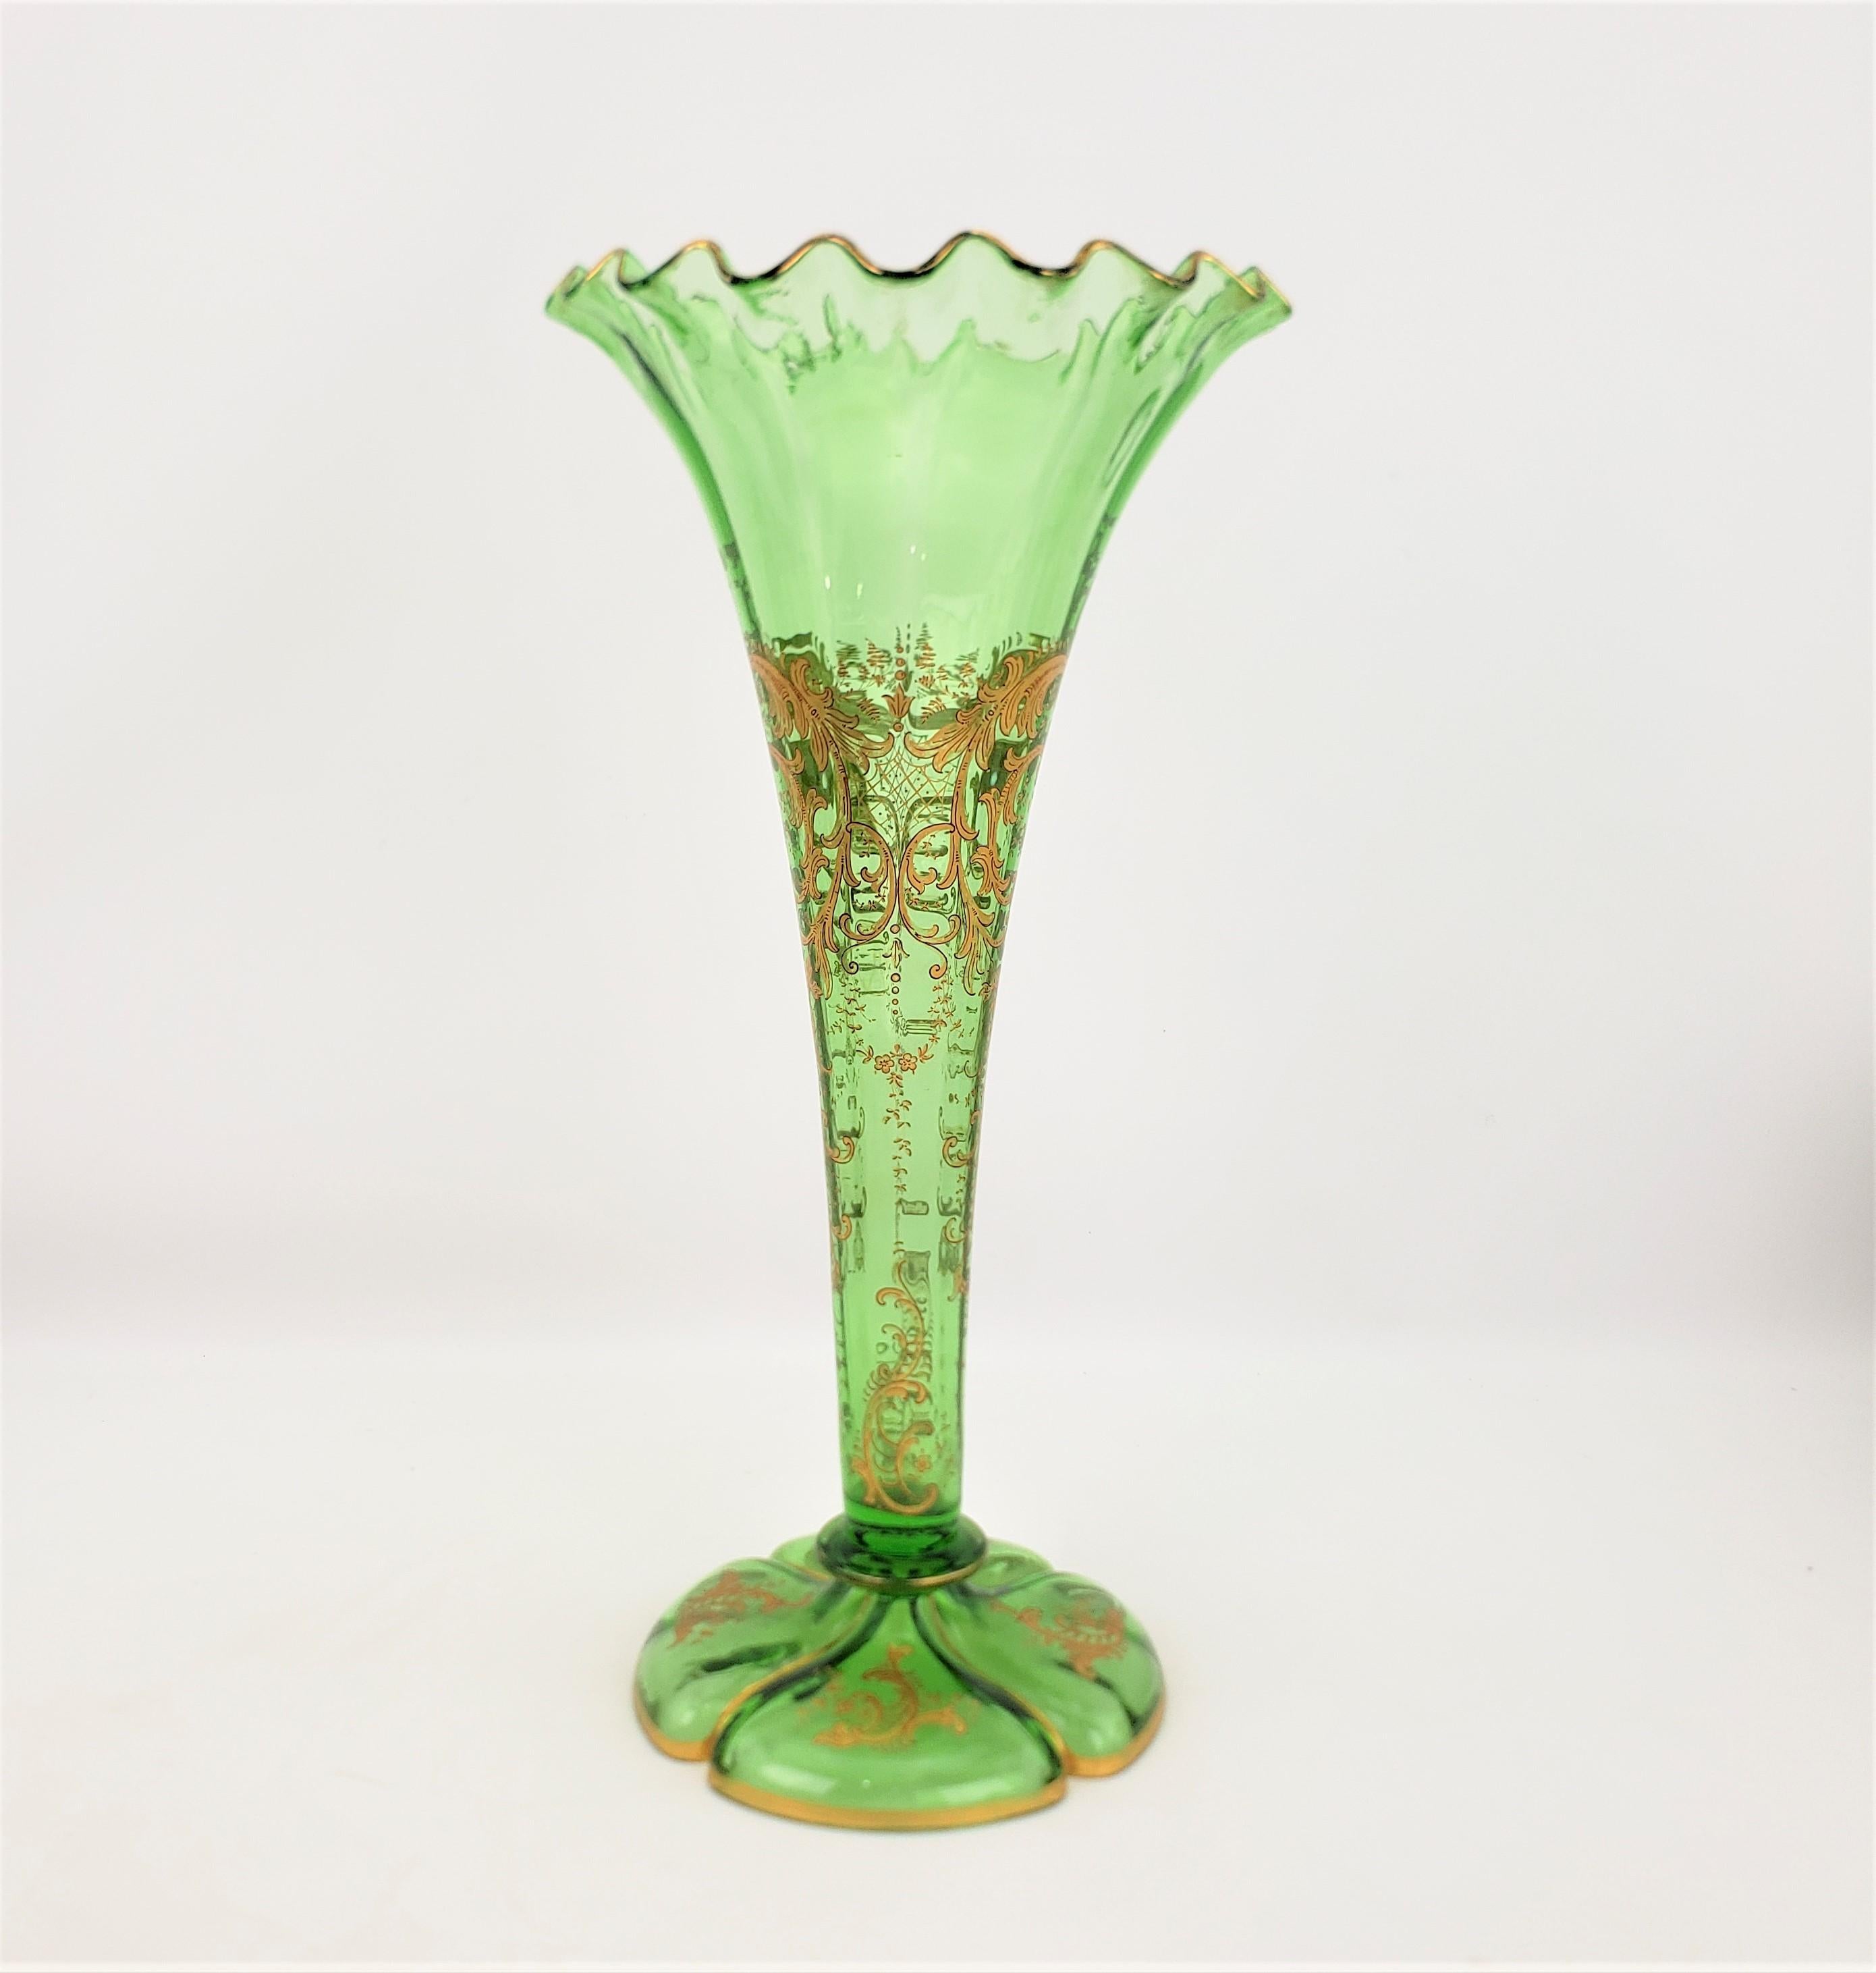 This large green antique art glass trumpet vase is unsigned, but presumed to have originated from England and dating to approximately 1880 and done in the period Victorian style. The vase has a trumpet shape with fluted edges around the top and a